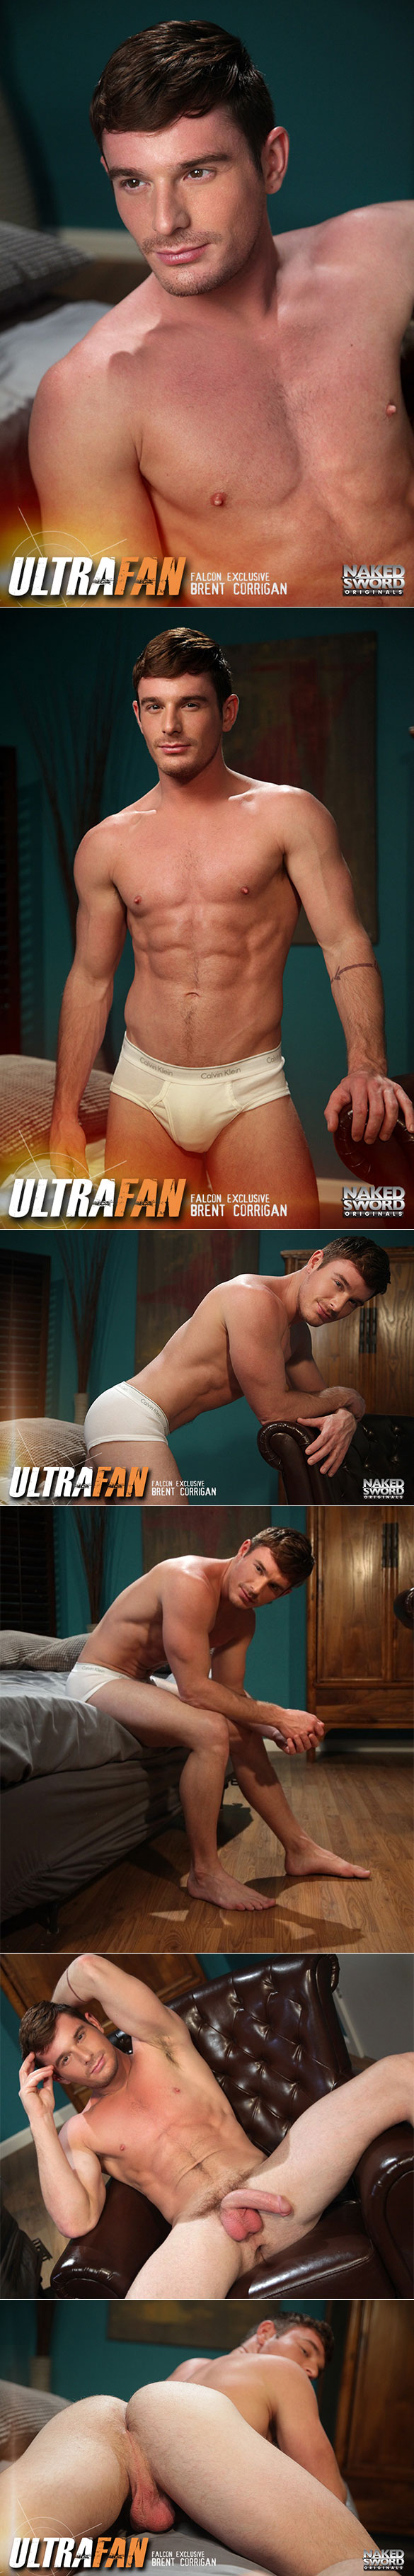 NakedSword Originals: Brent Corrigan and Jack Hunter flip fuck in "Ultra Fan: Scene 4 – We Did This All for You"